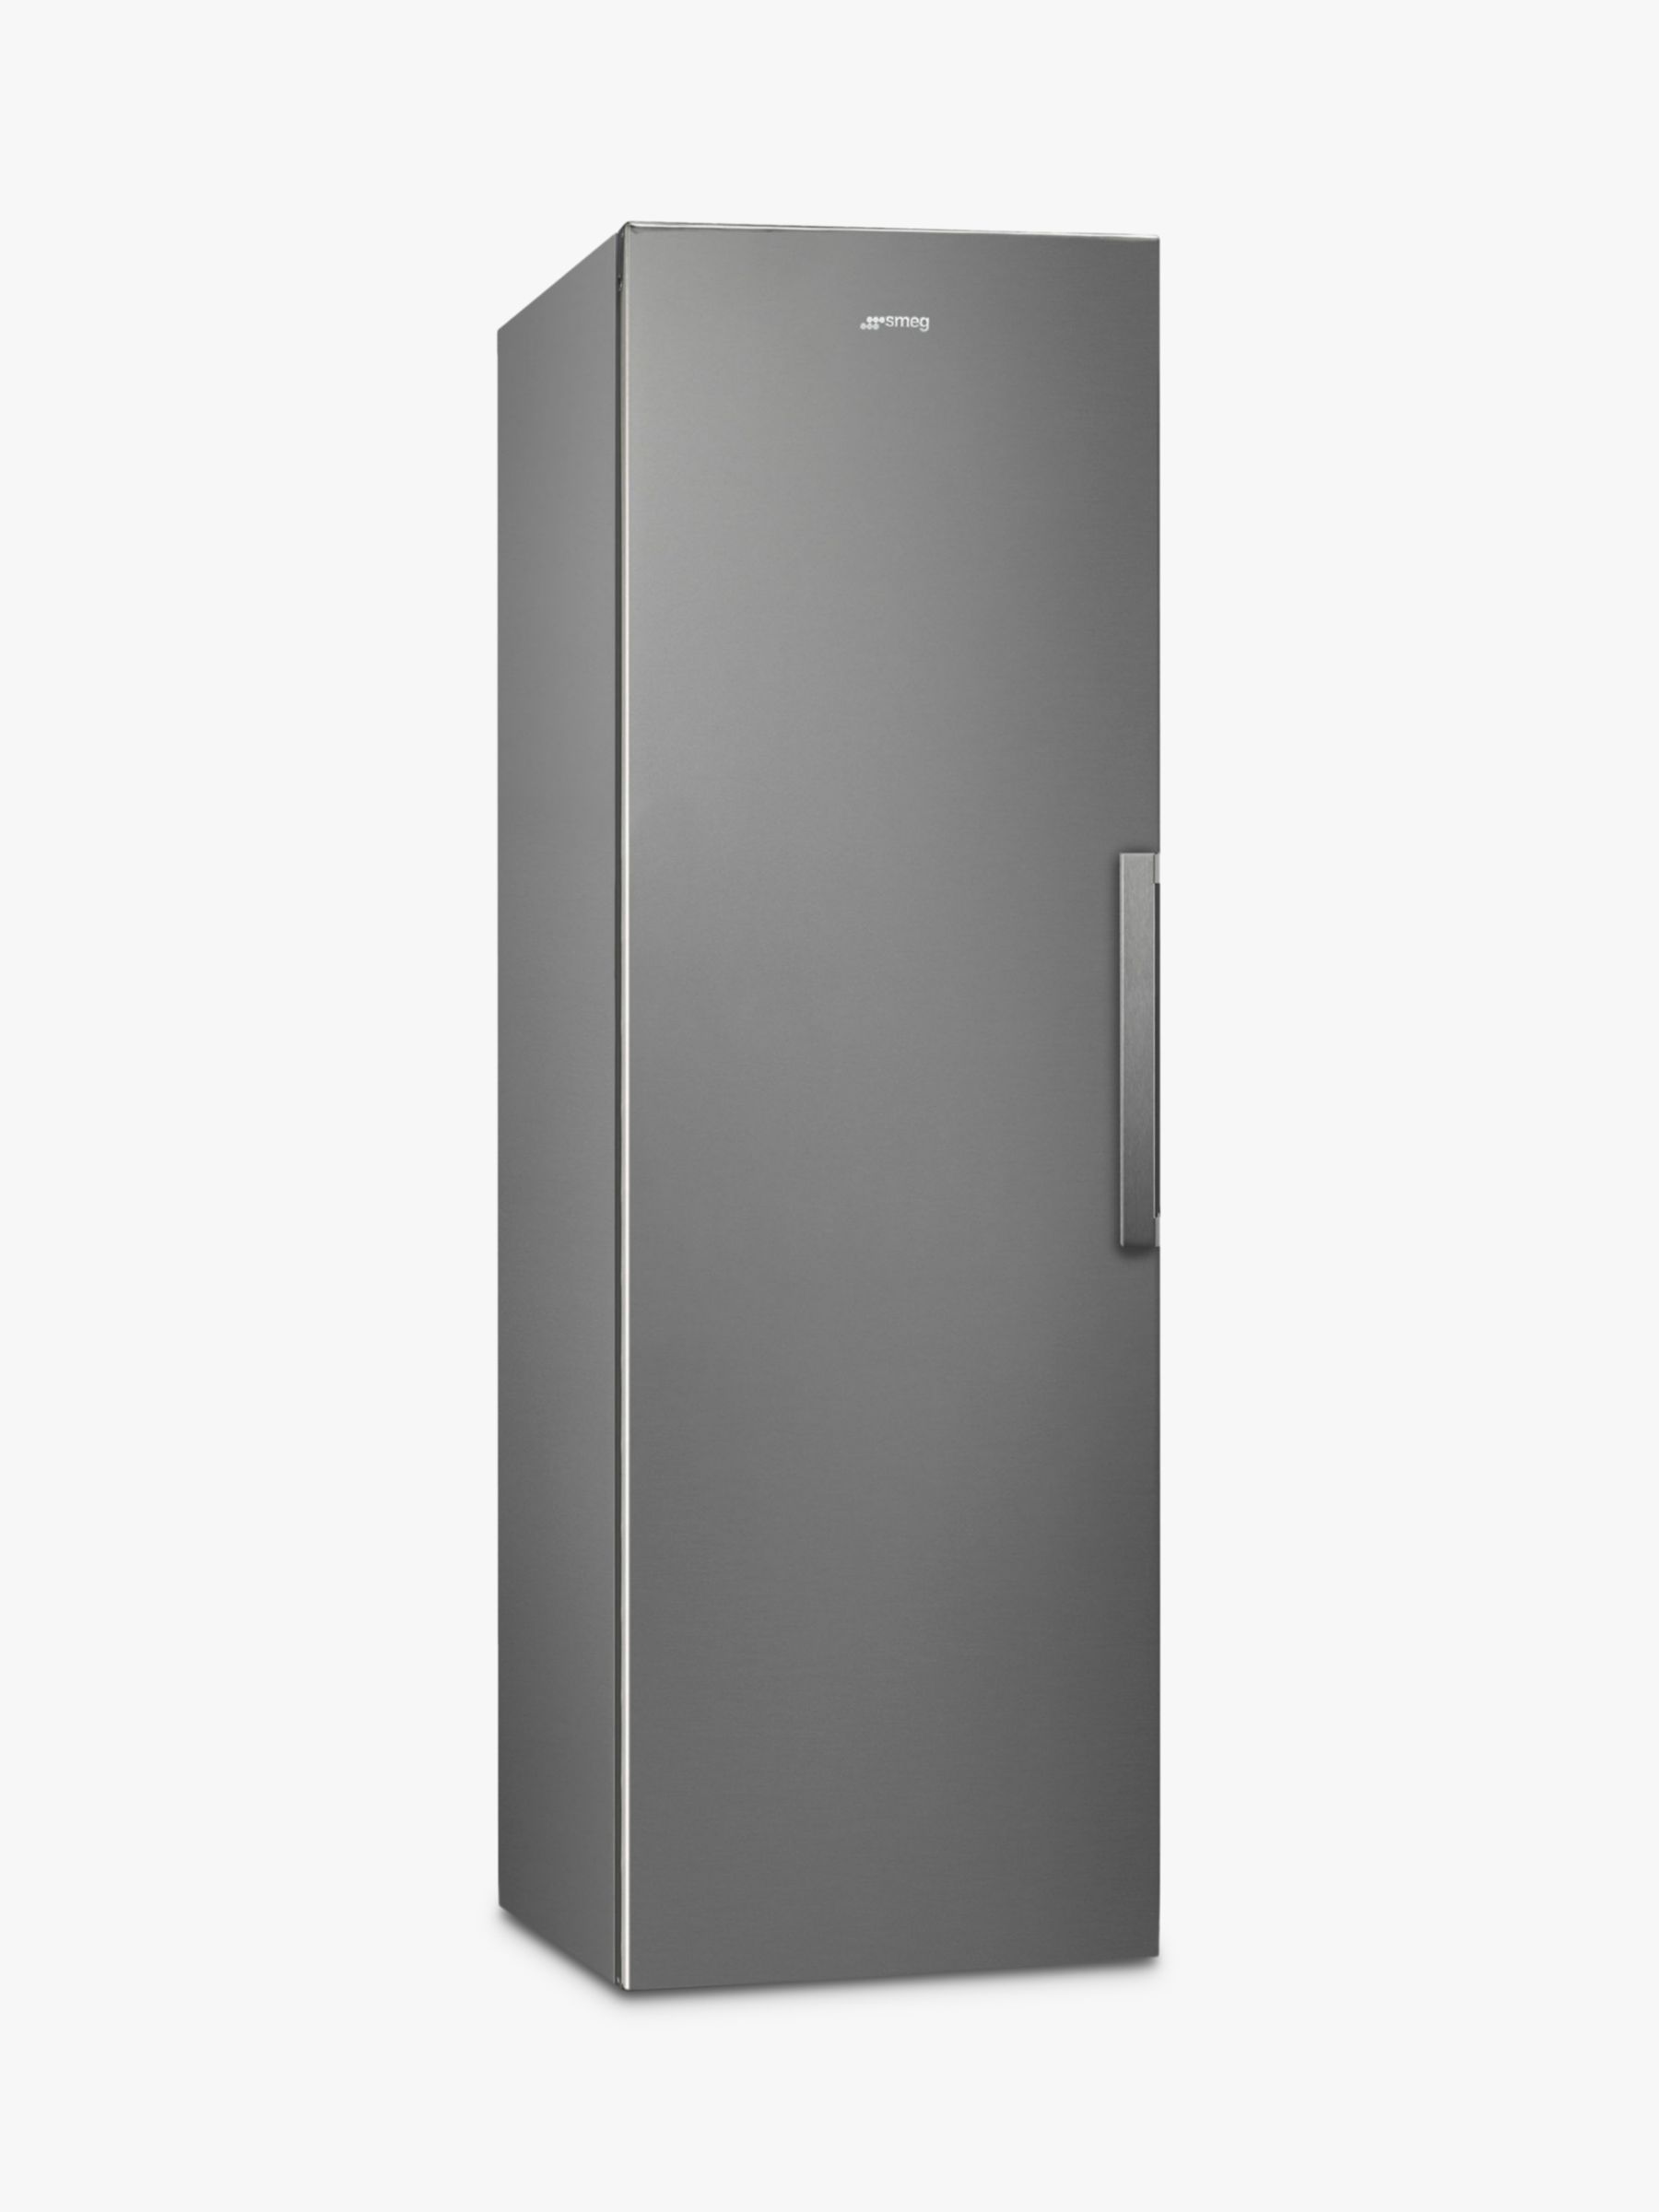 Smeg UK26PXNF4 Tall Freestanding Freezer, A+ Energy Rating, 60cm Wide, Silver